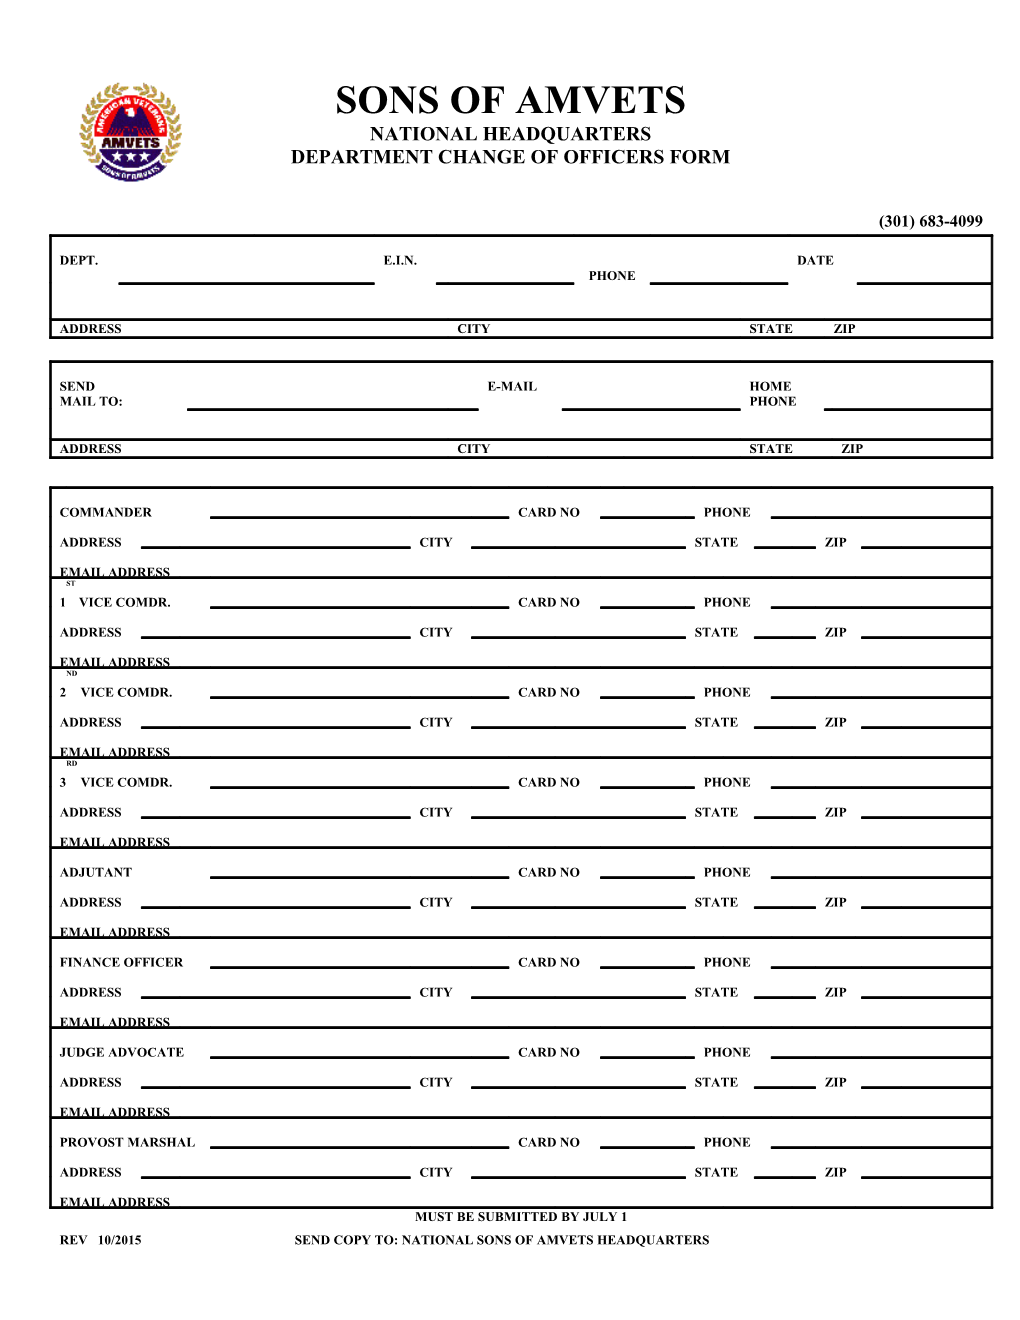 Department Change of Officers Form